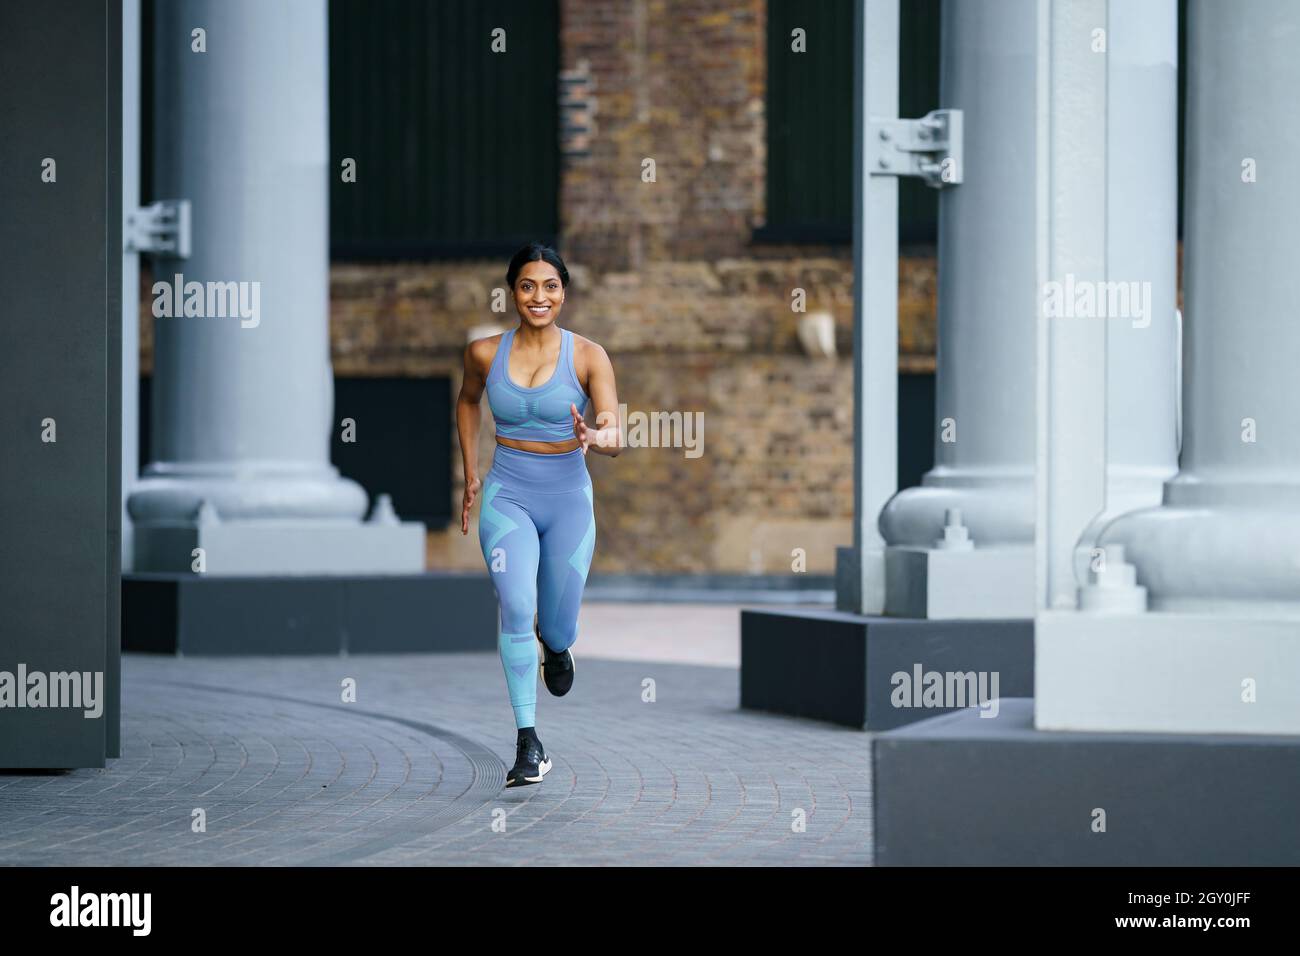 Woman in a grey outfit running in urban setting Stock Photo